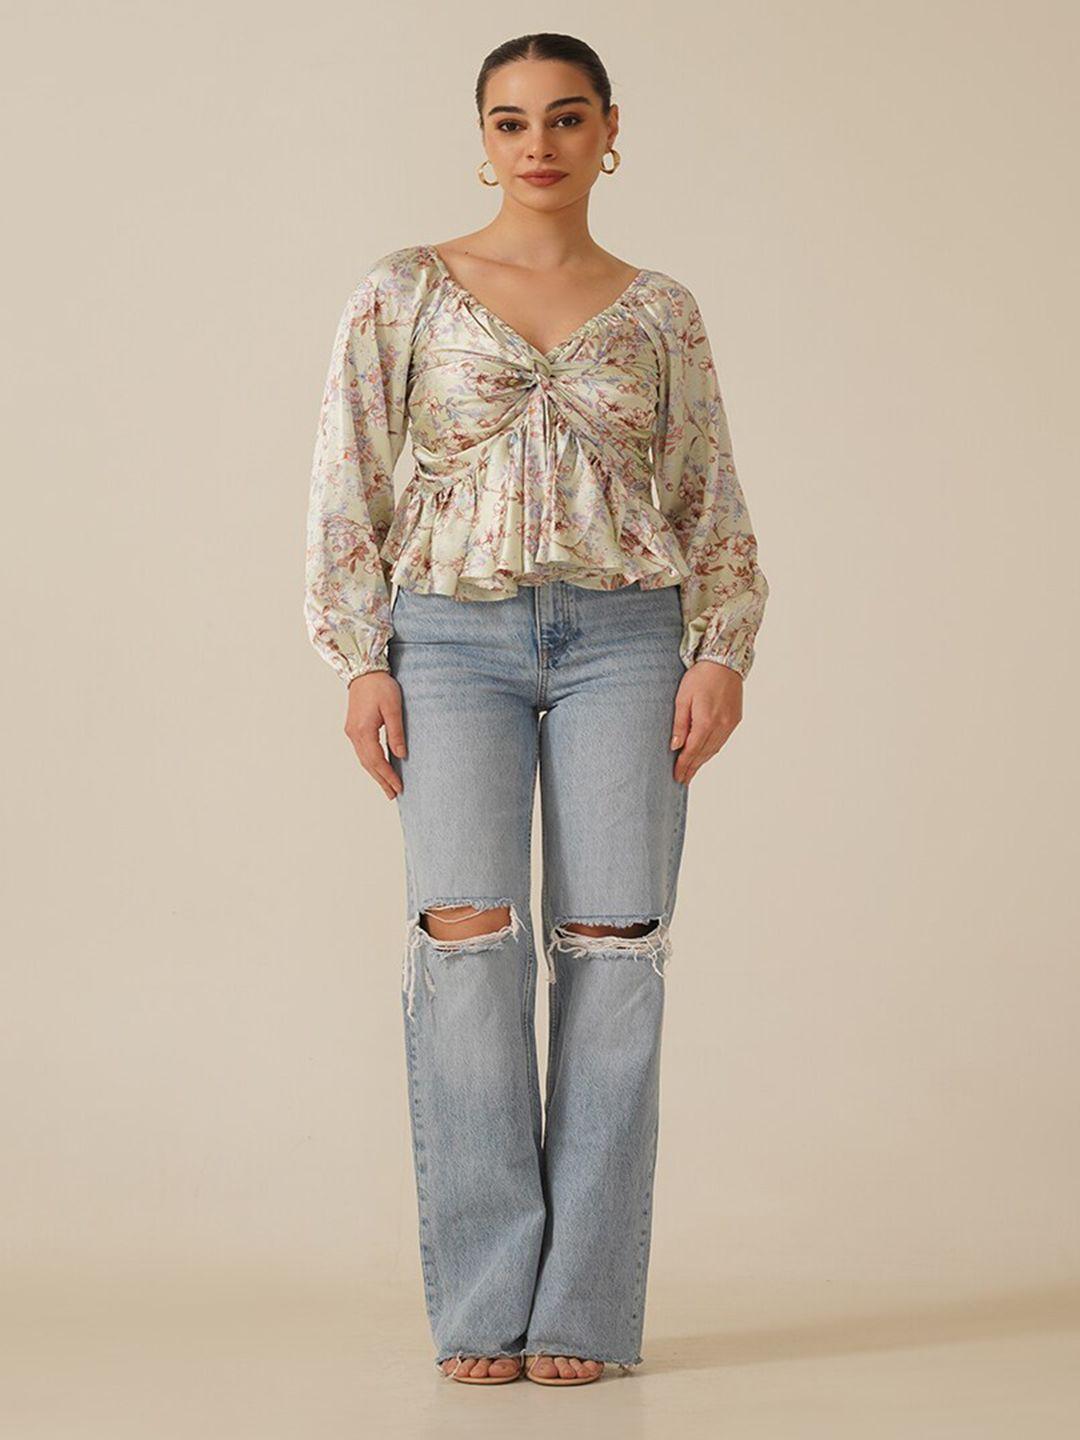 ipso facto floral printed puff sleeves satin top